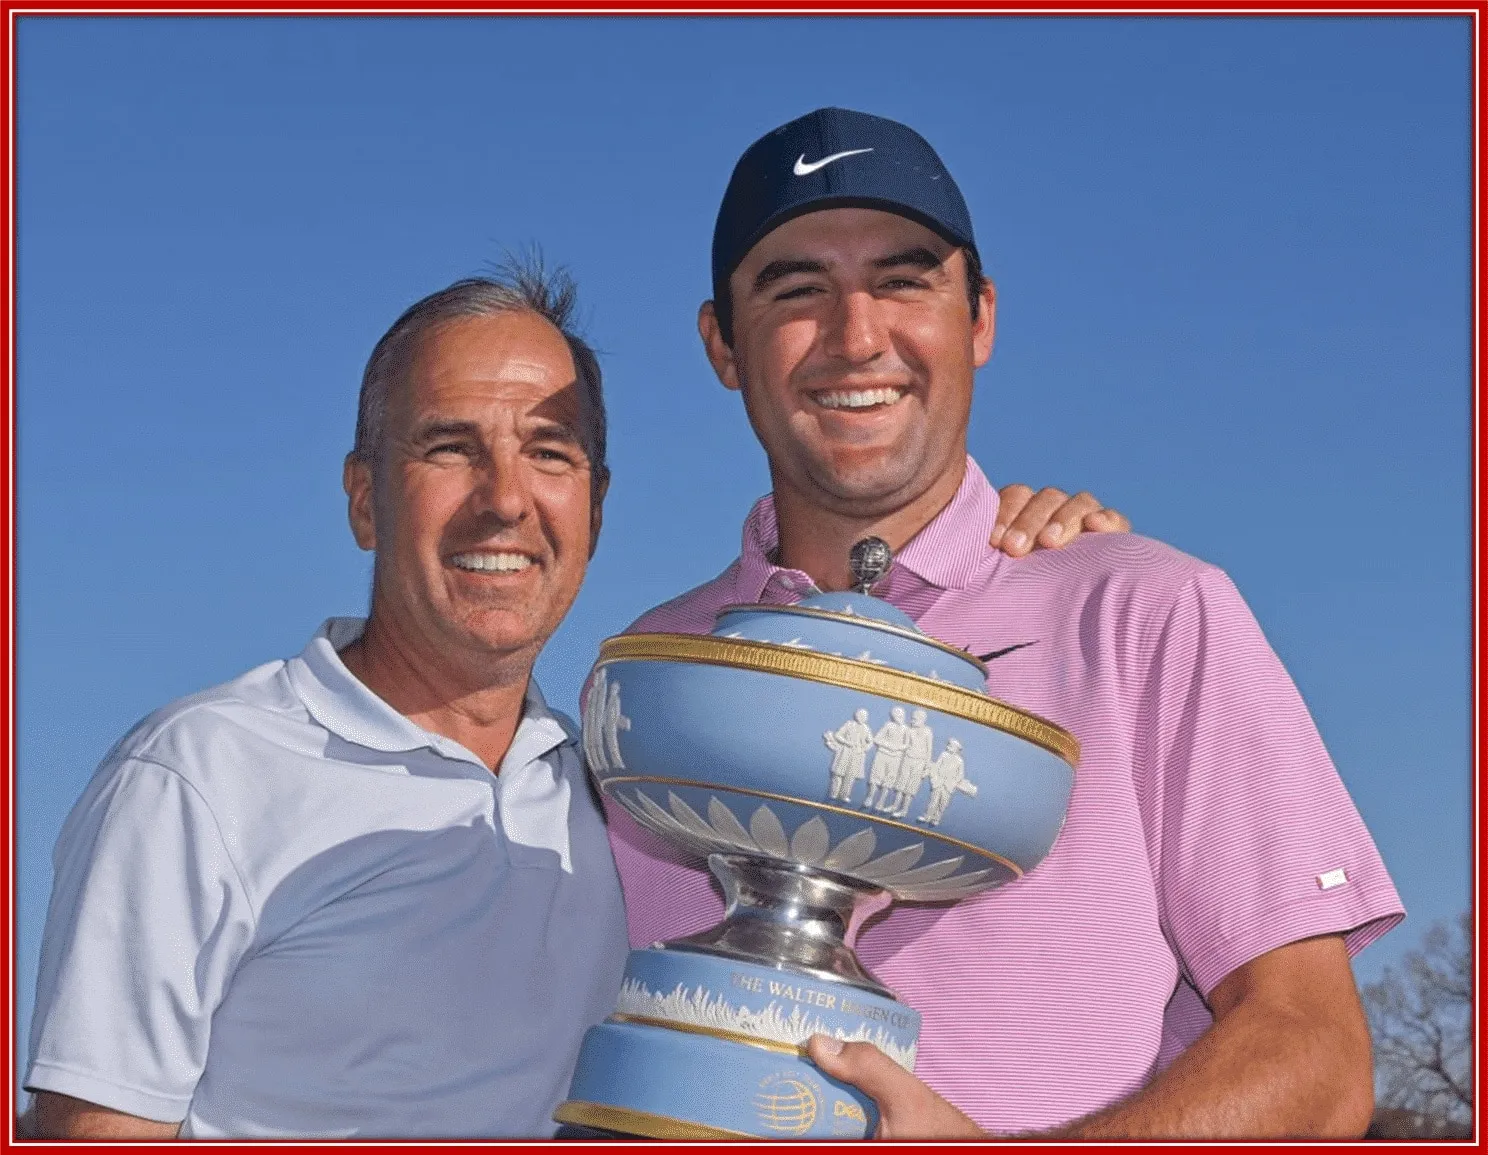 A picture of father and son after Scottie's win at the 2022 Masters.